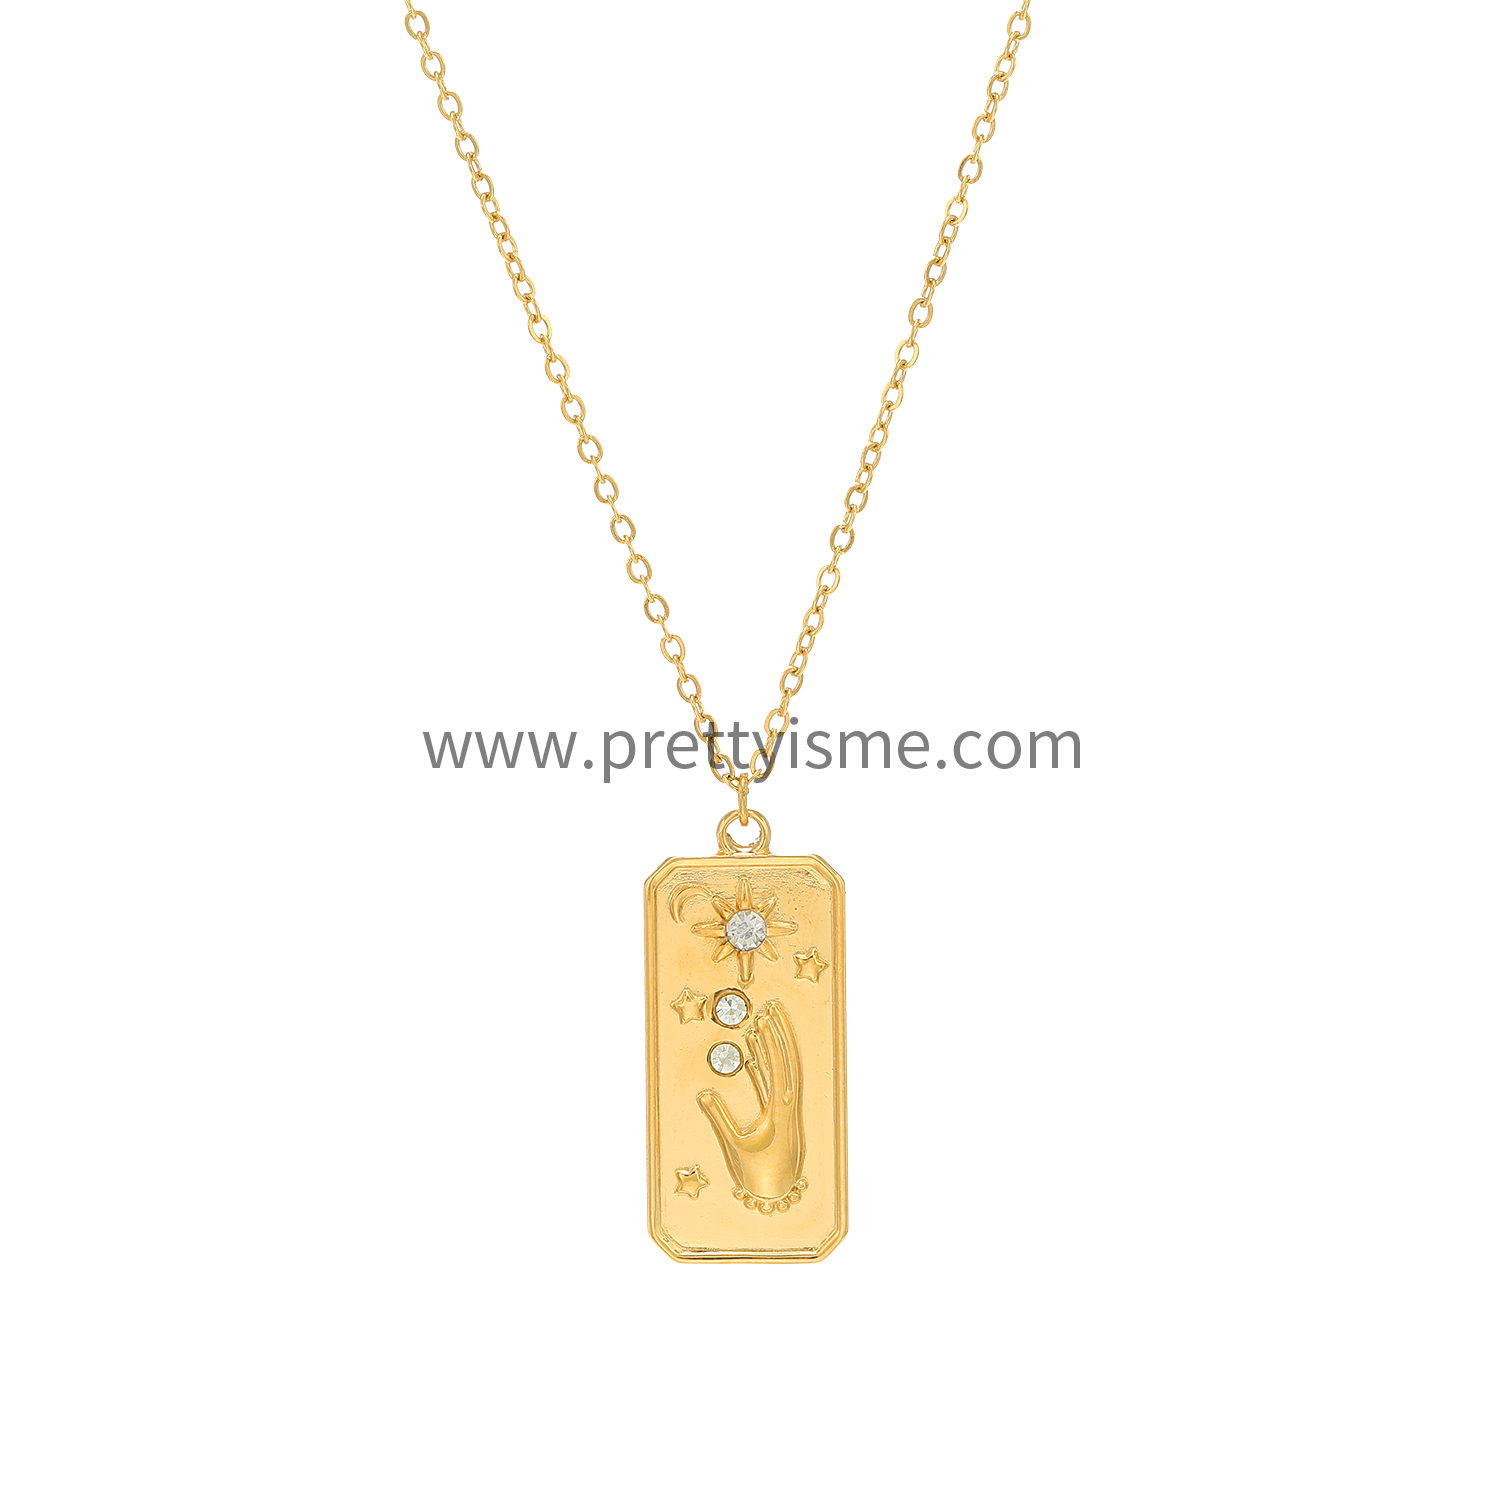 Thin Necklace Gold Plated 18K with Square Pendant Star Moon Pattern with Sparkling Diamonds (5).webp